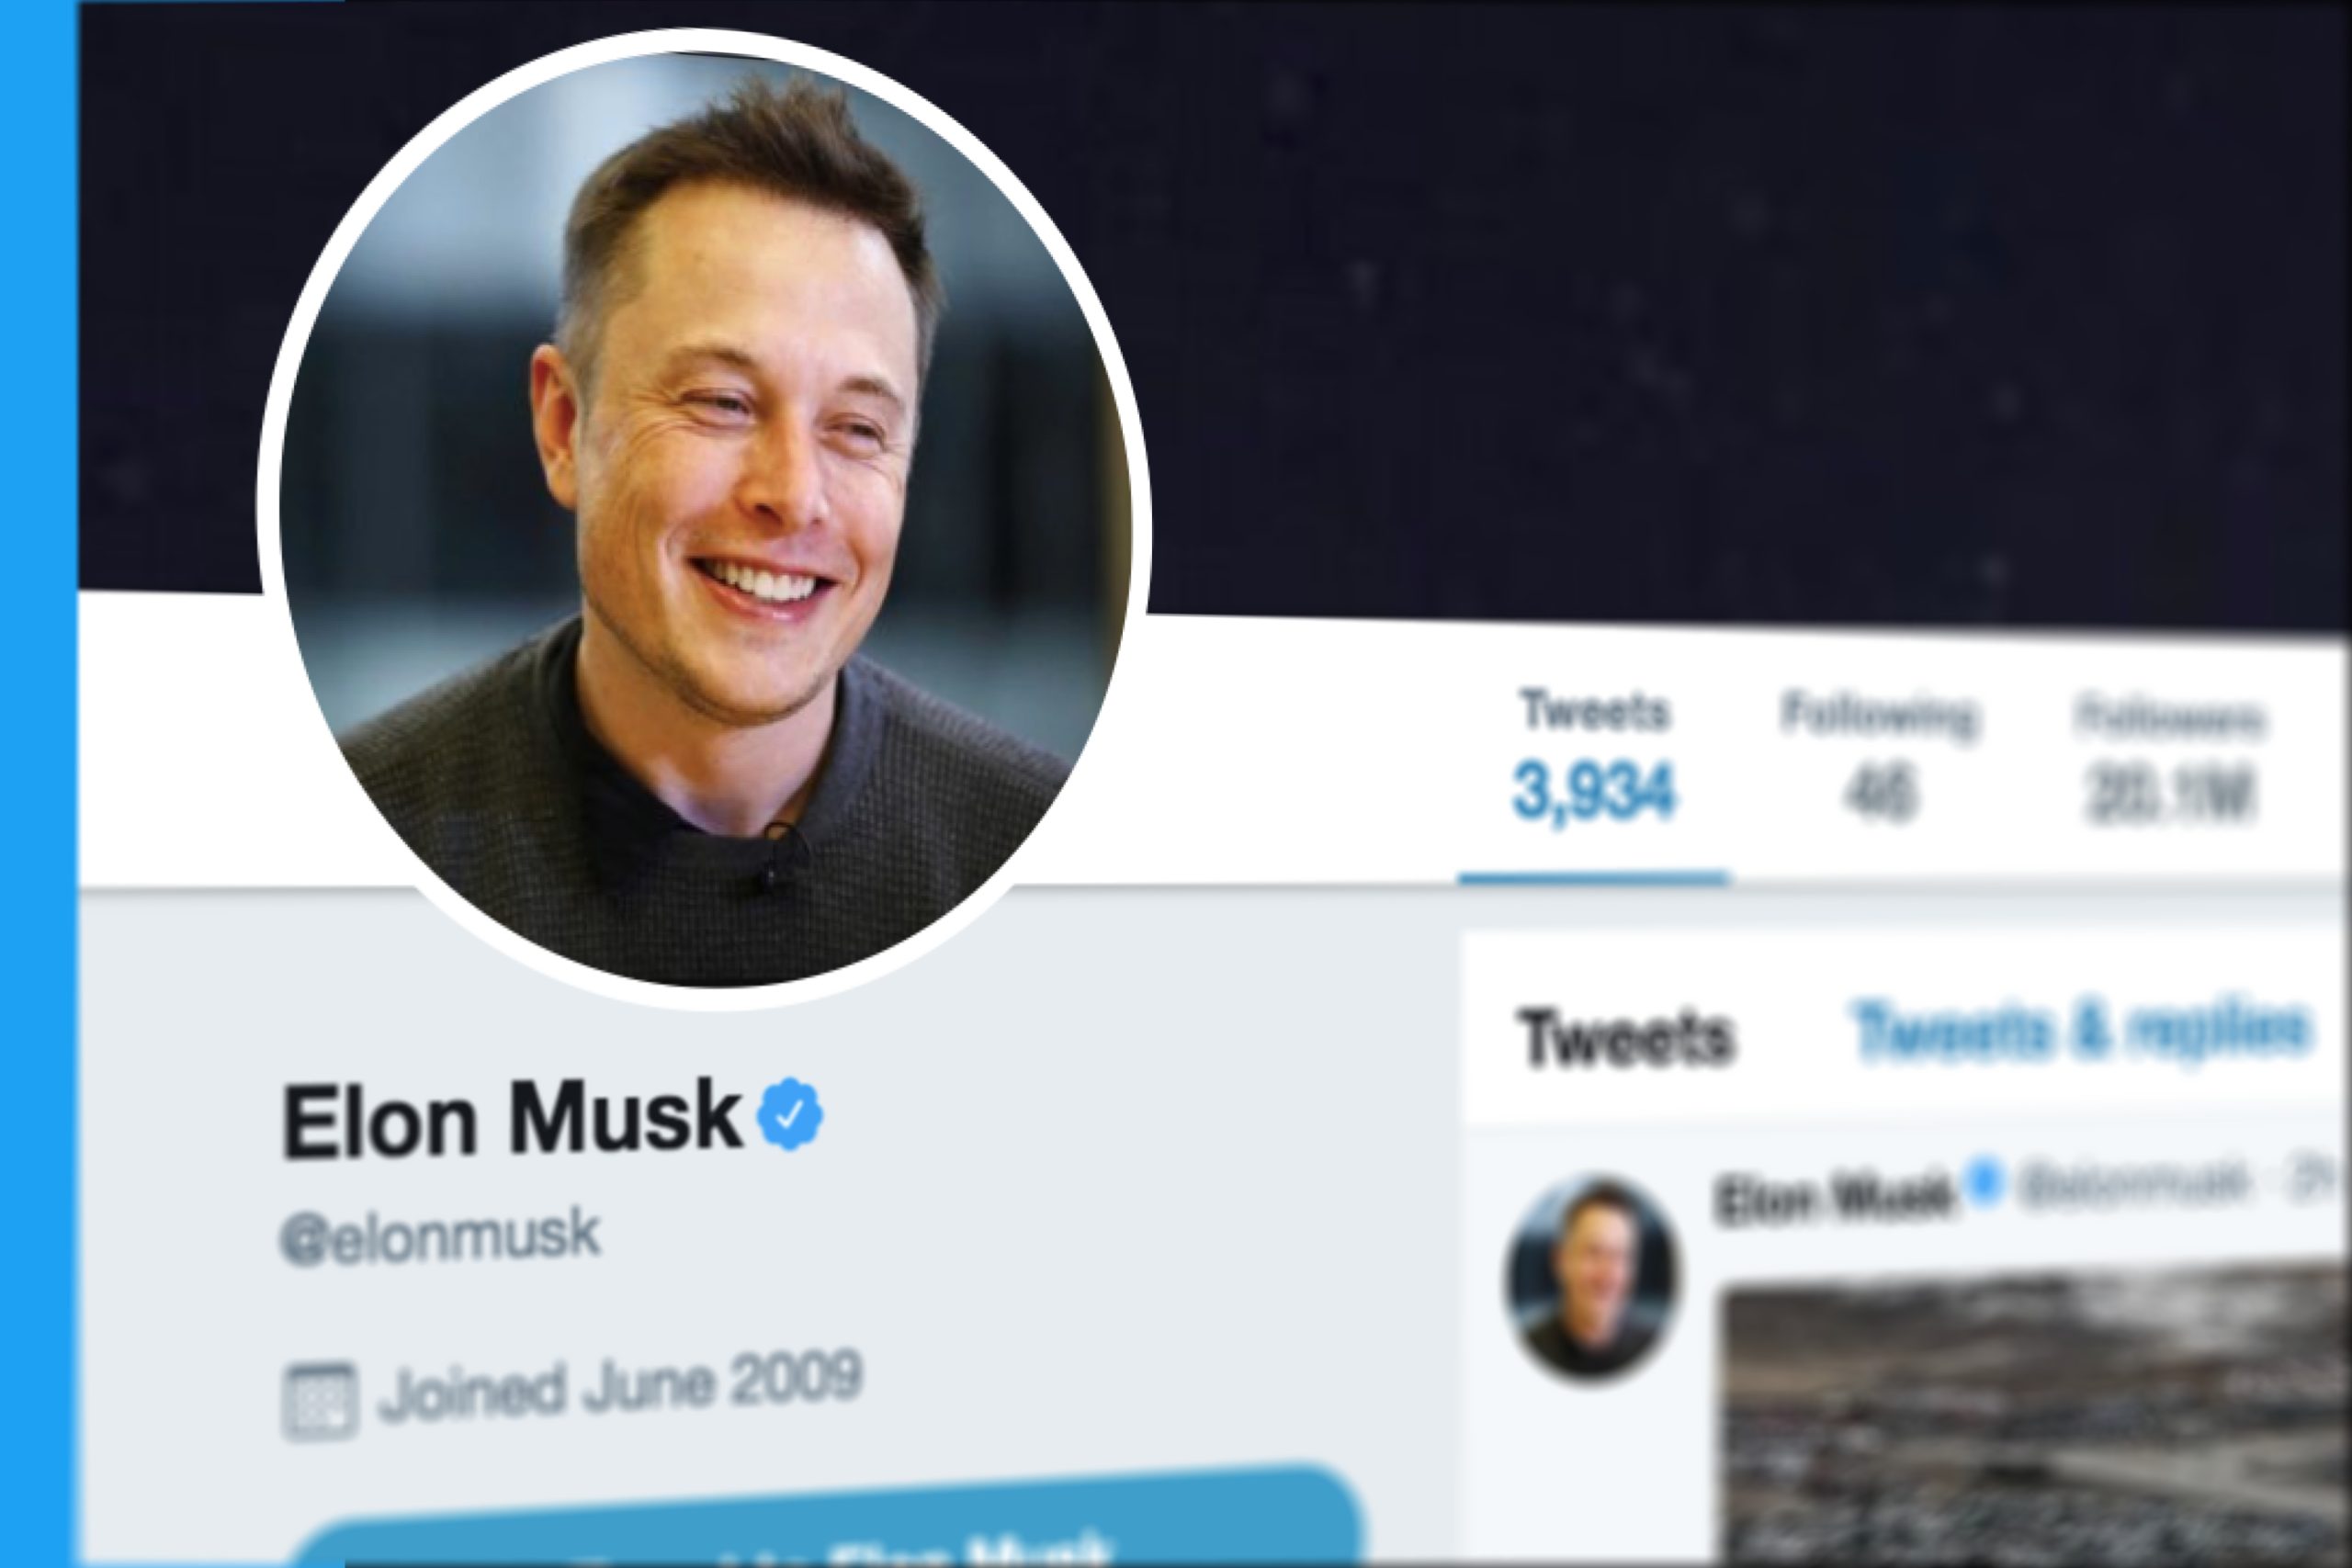 Twitter problems for Elon Musk mount as landlord sues platform for not paying rent